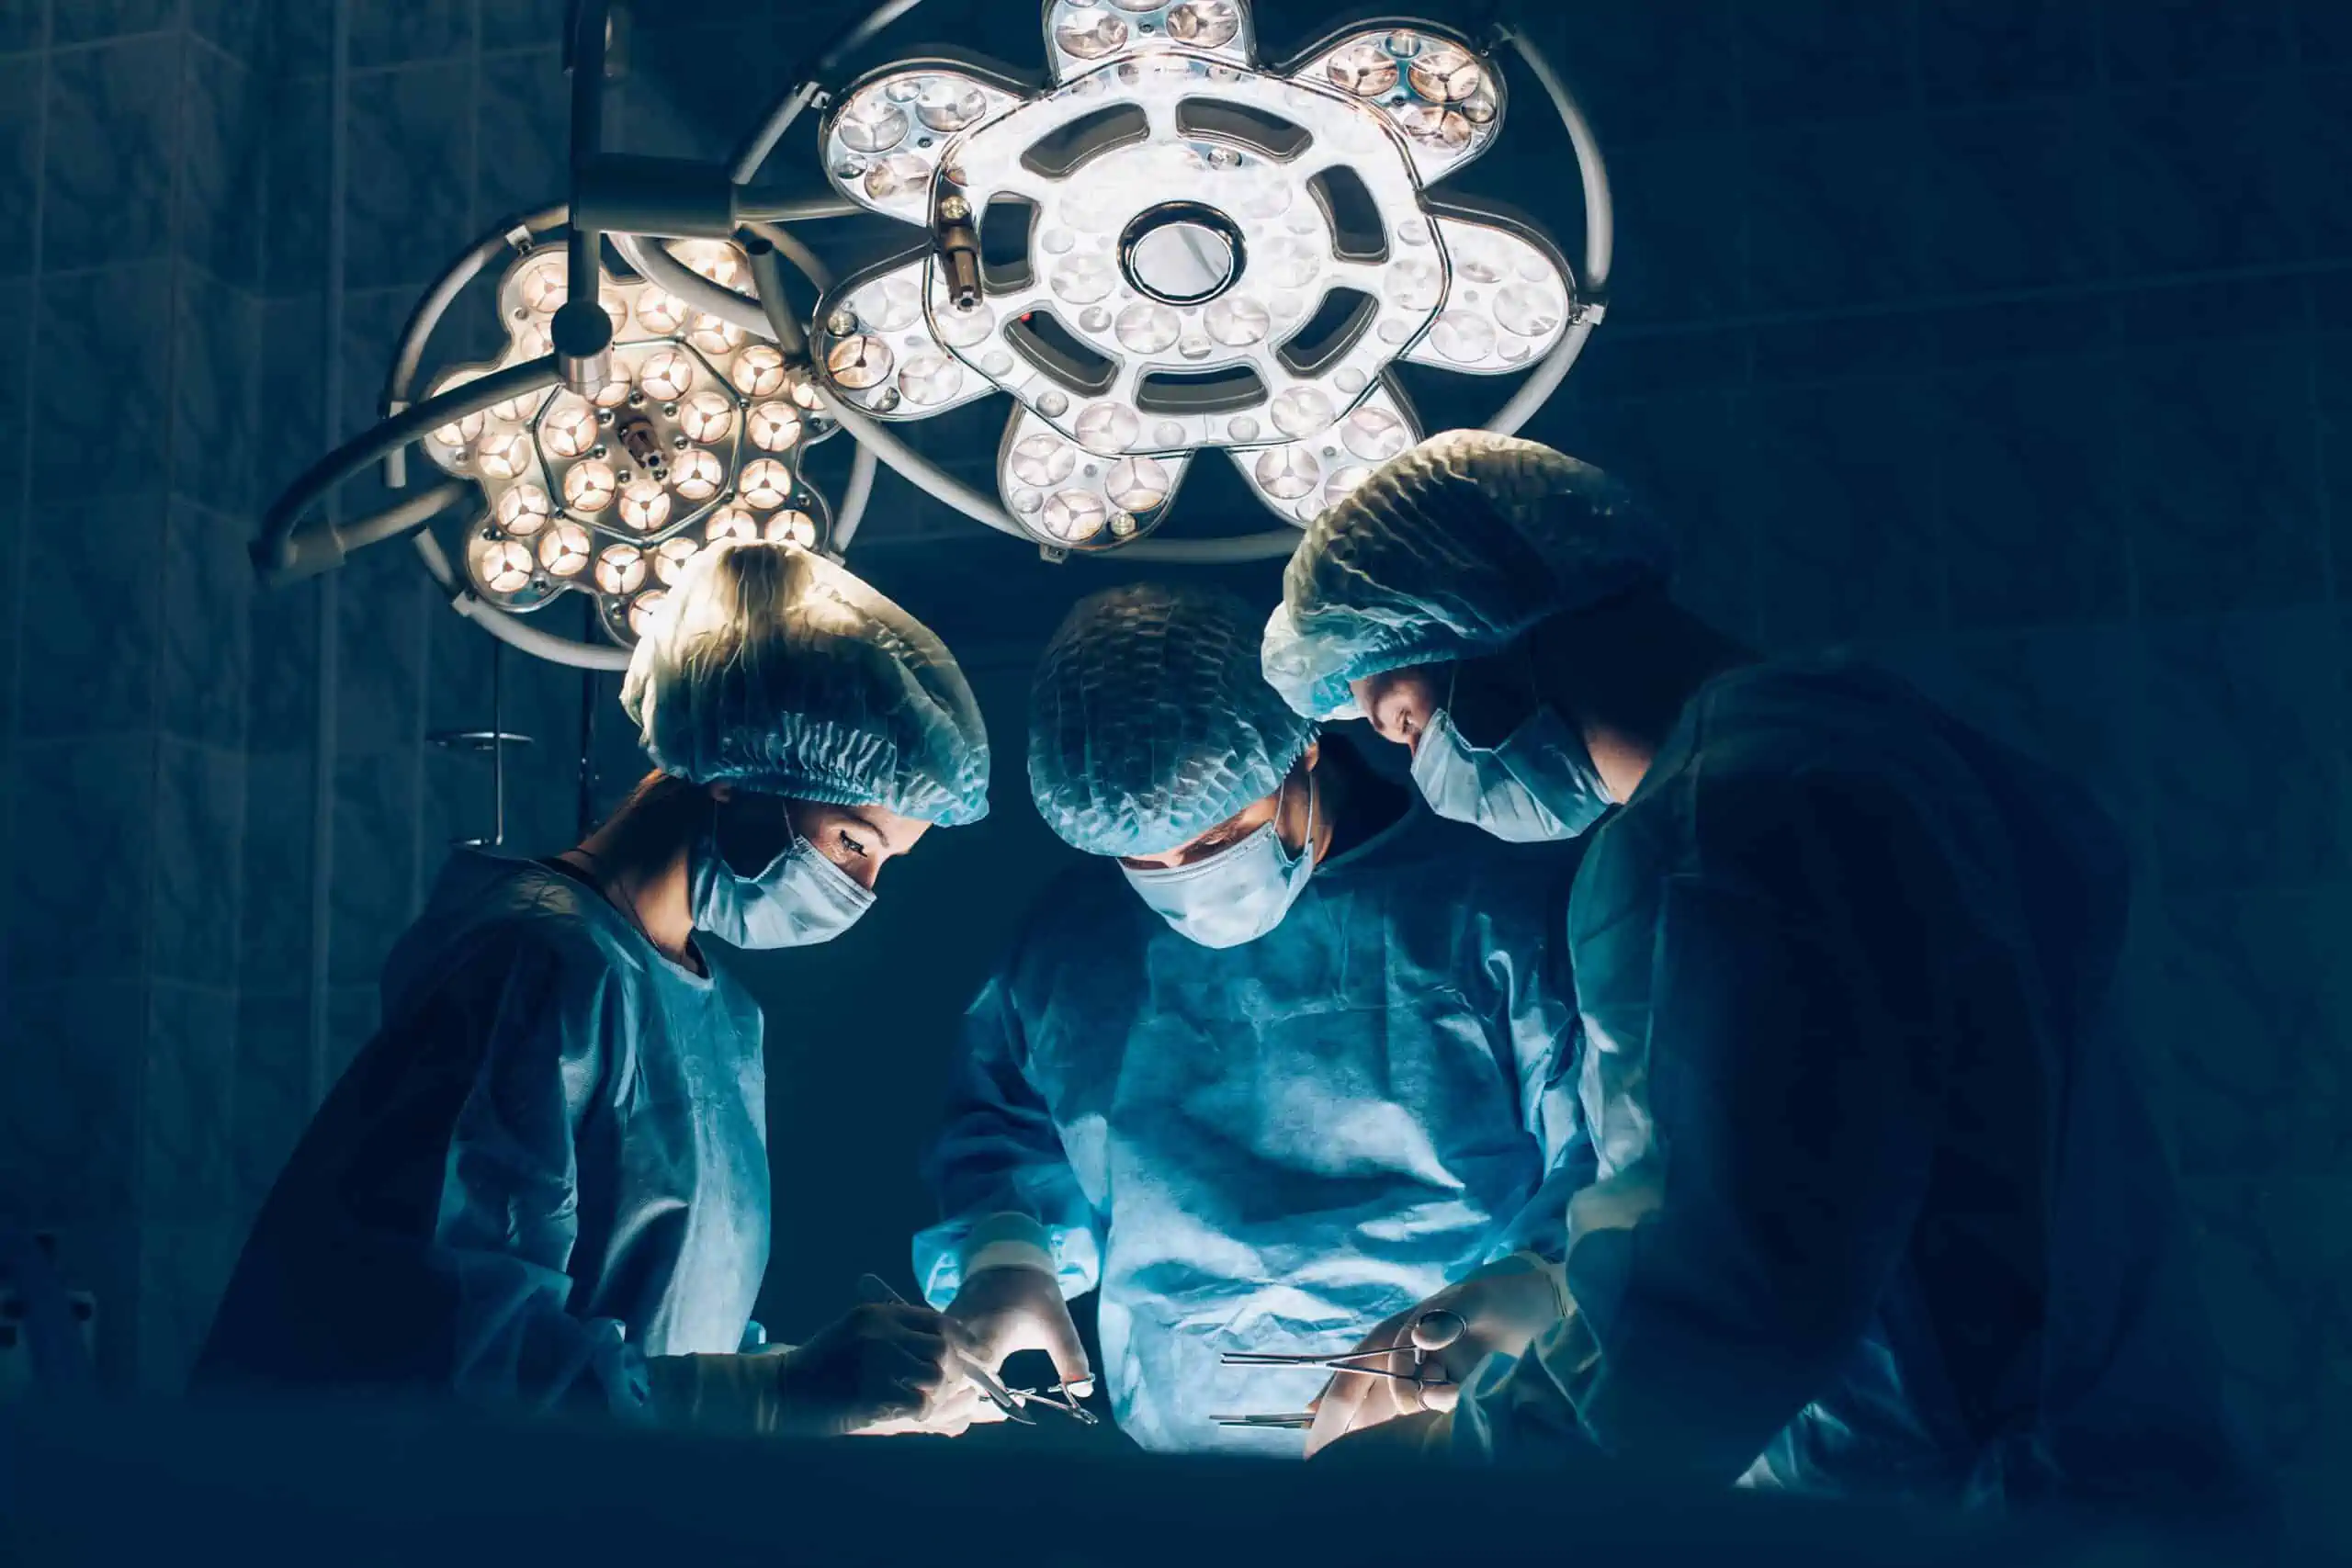 three surgeons performing a procedure in an operating room.